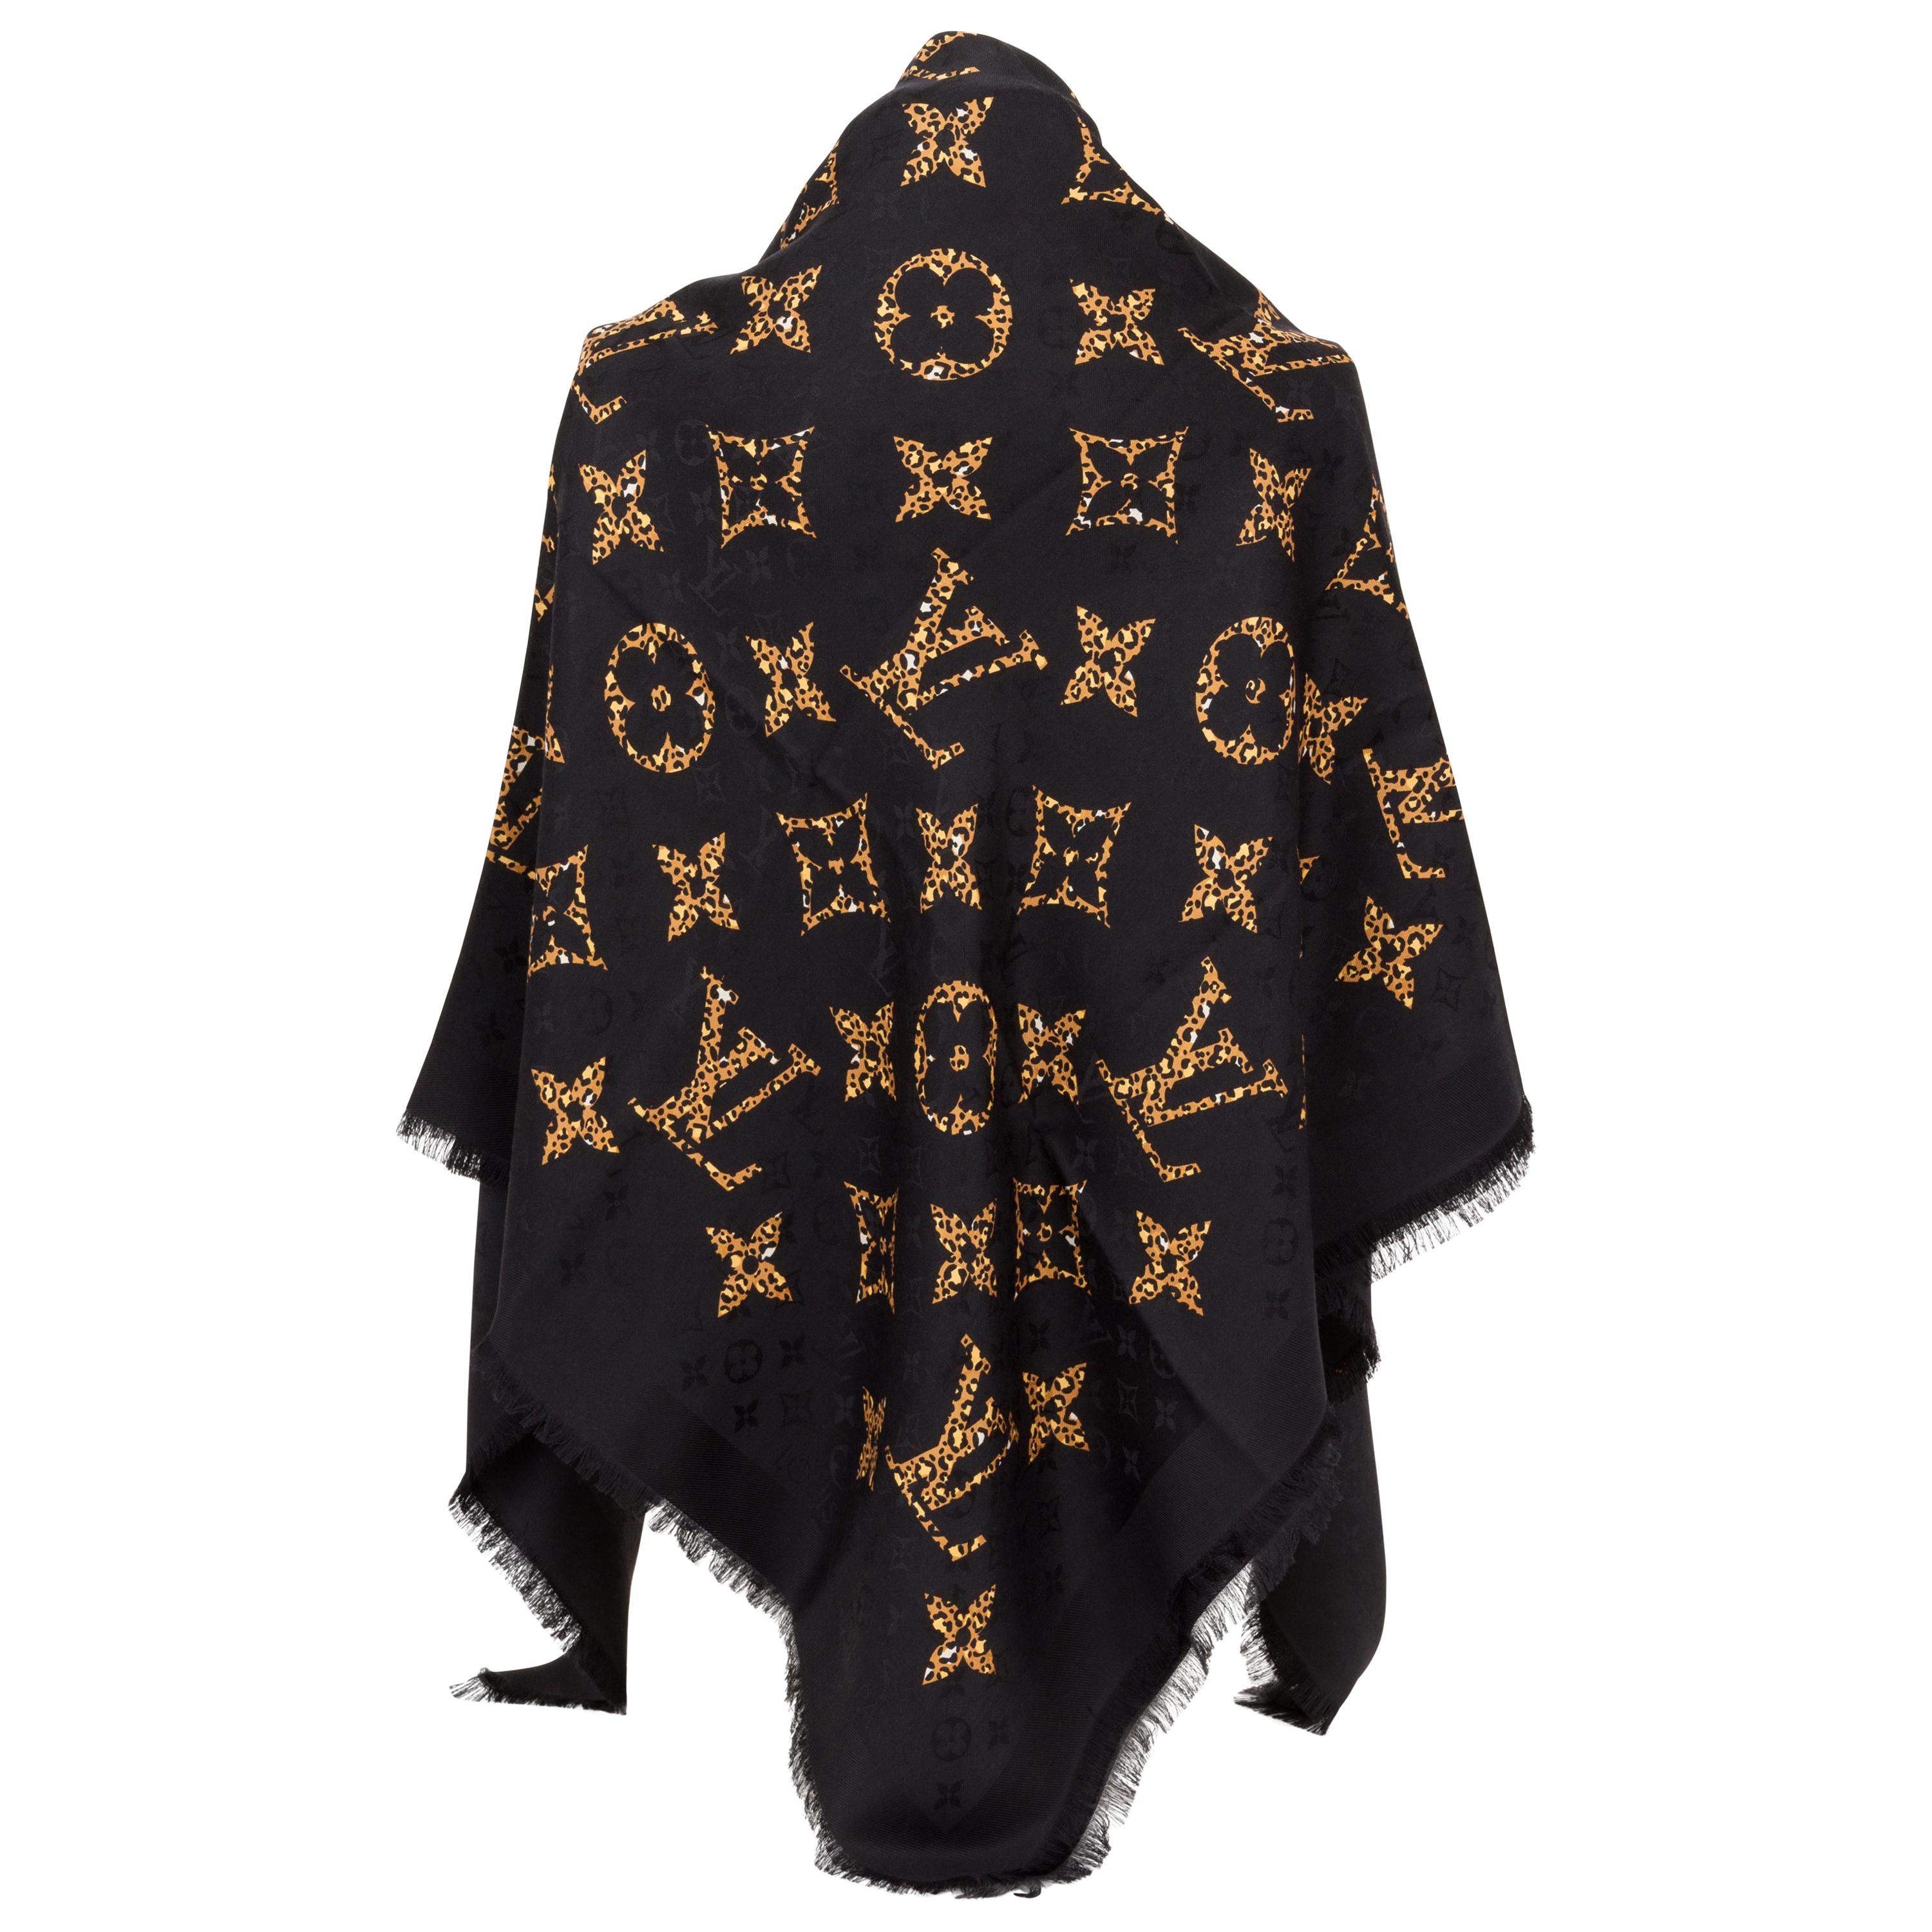 Vuitton Mens Scarf - For Sale on 1stDibs  louis vuitton scarf mens, louis  vuitton men's scarf, louis vuitton men scarf